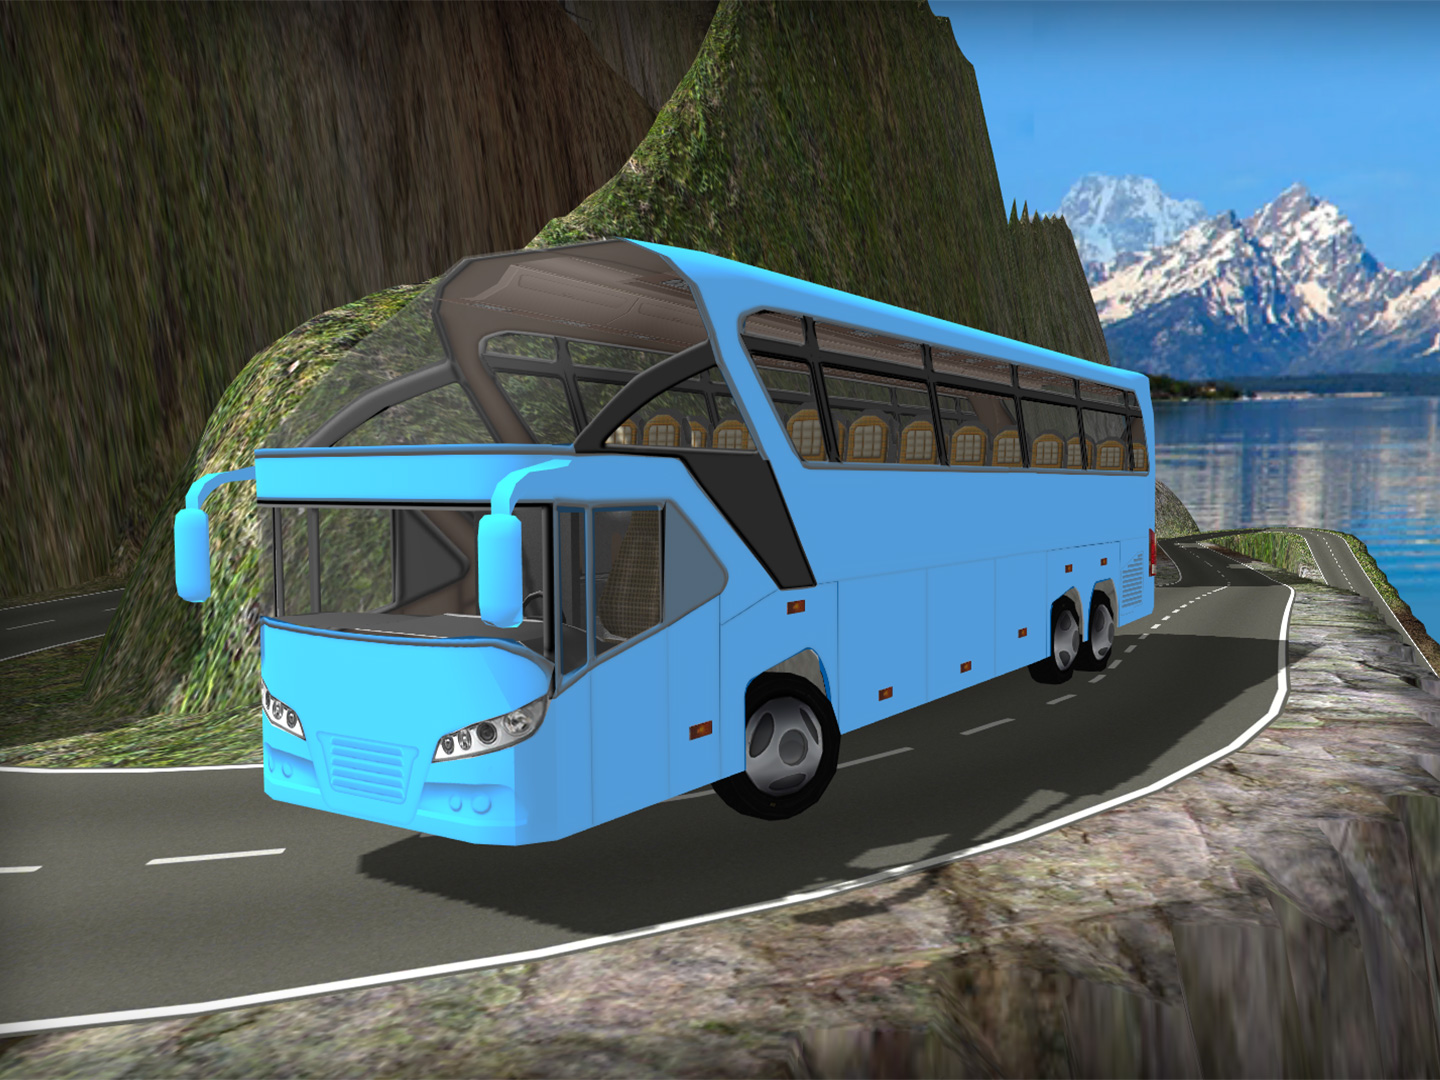 Bus Simulator 3D - Released image - IndieDB